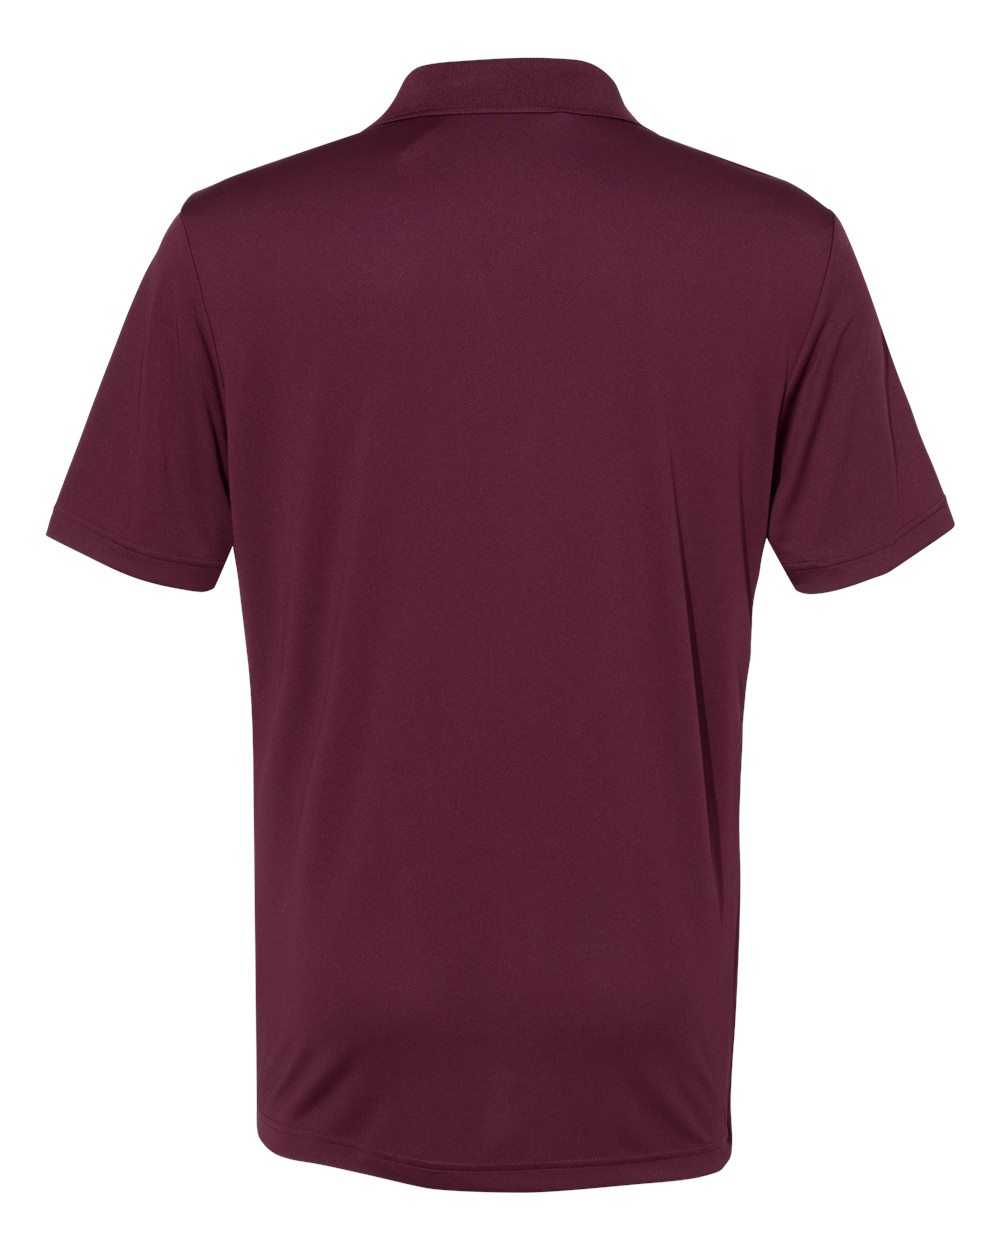 Adidas A230 Performance Sport Shirt - Maroon - HIT a Double